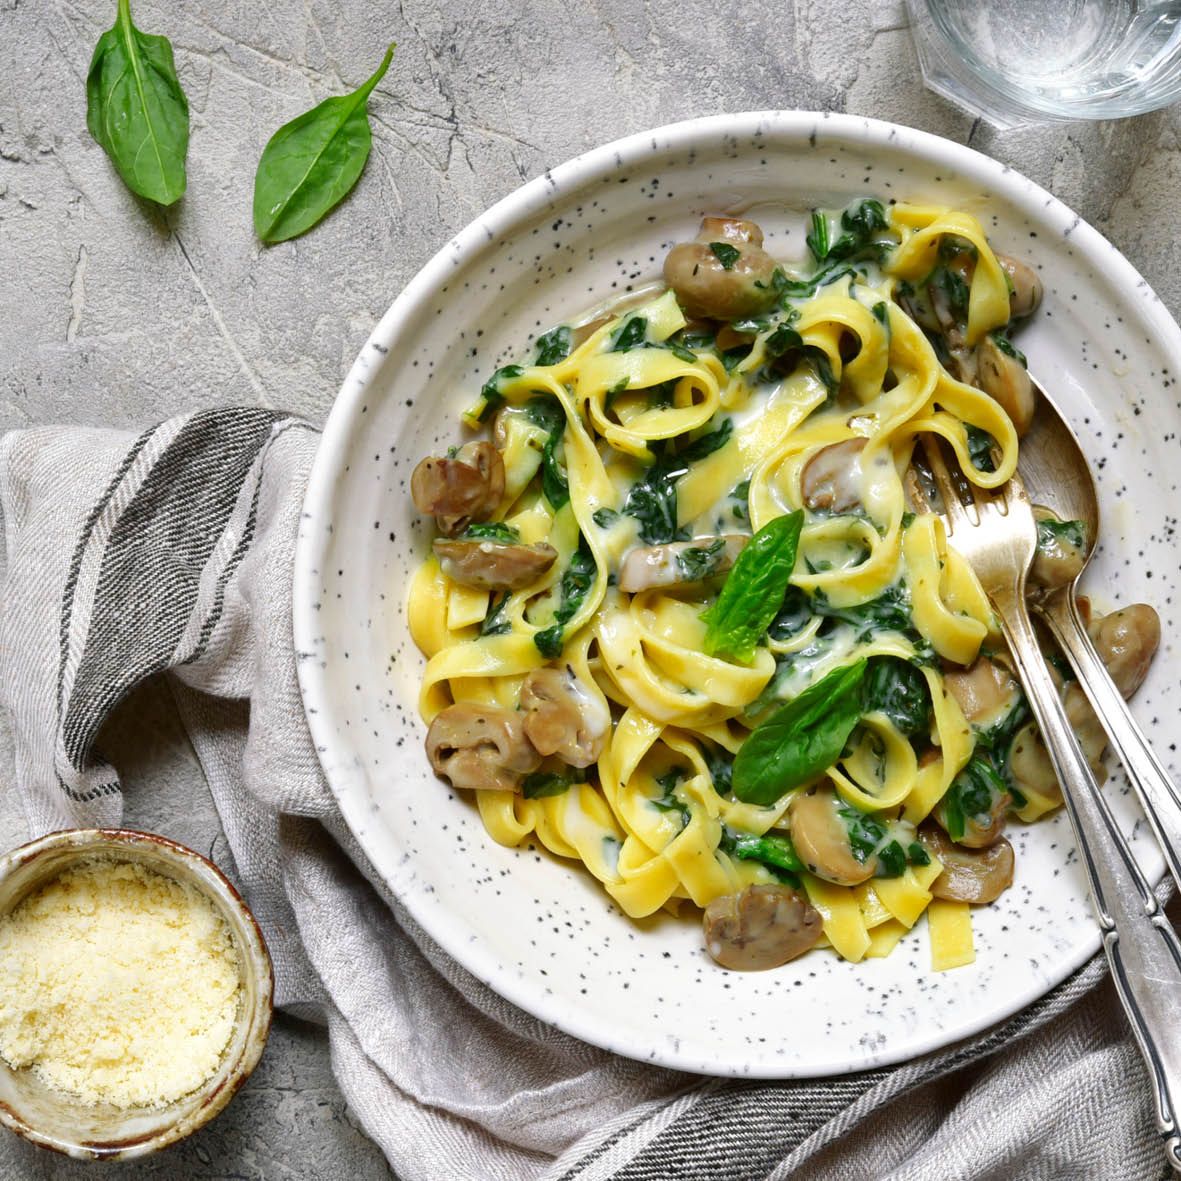 Creamy_Tagliatelle_with_Mushrooms_and_Baby_Spinach.jpg